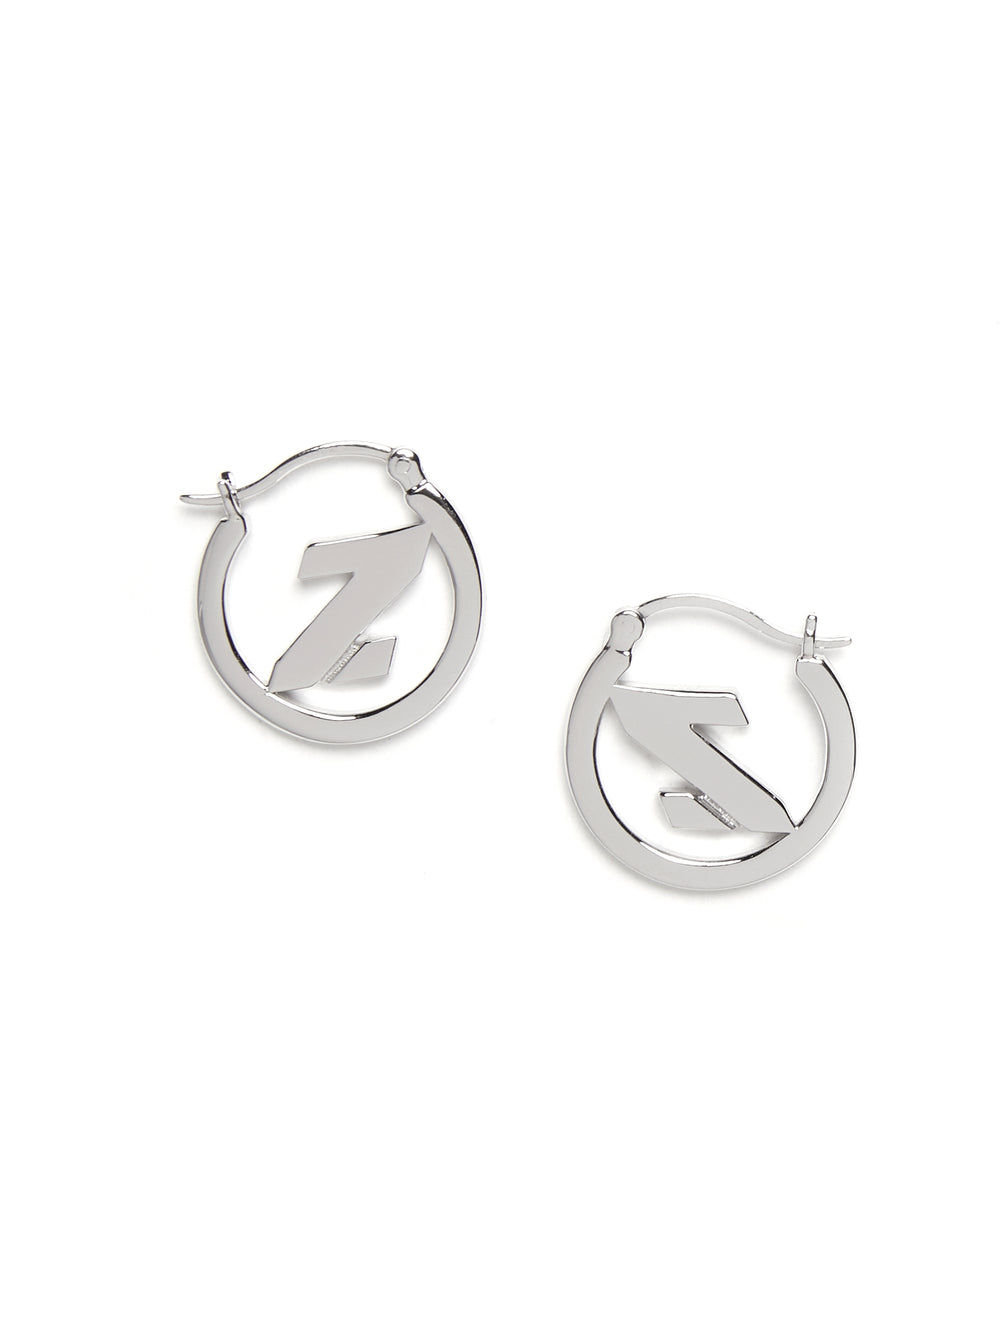 Mini Z Hoop Earrings (For China shipping only)